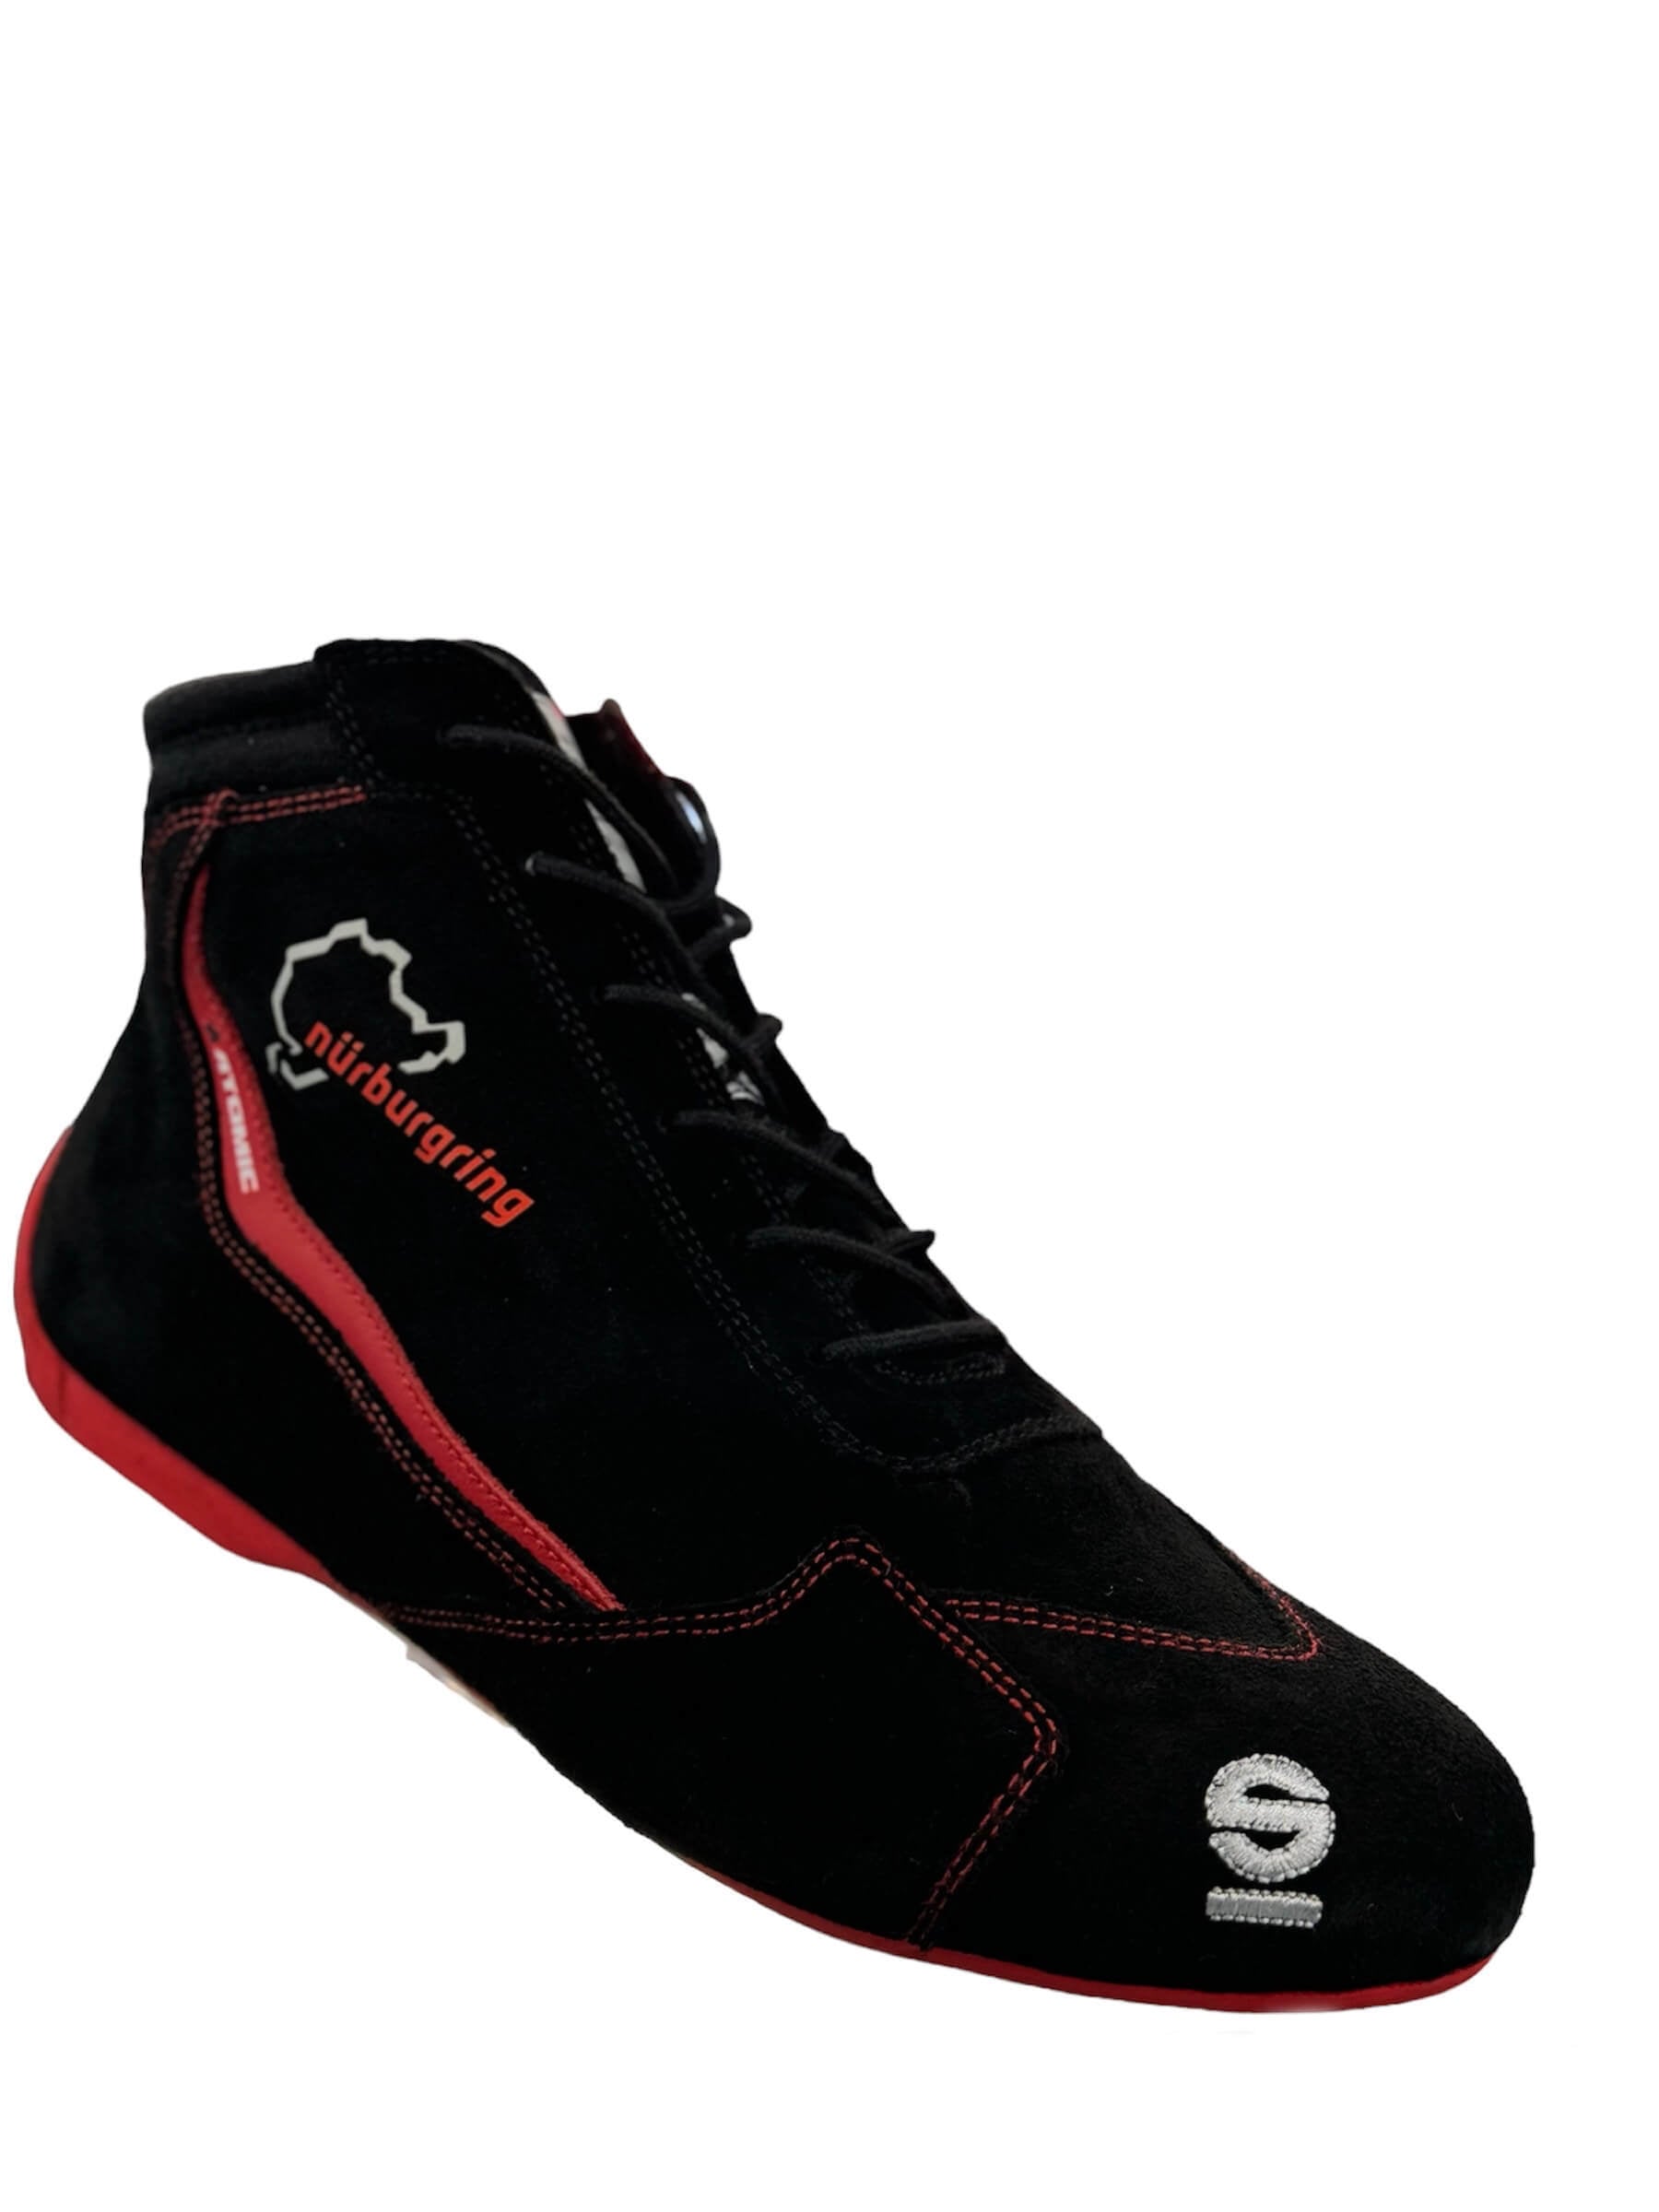 SPARCO 001295SP_NBR47 Shoes Slalom Nurburgring Edition black/red Size 47 Photo-0 